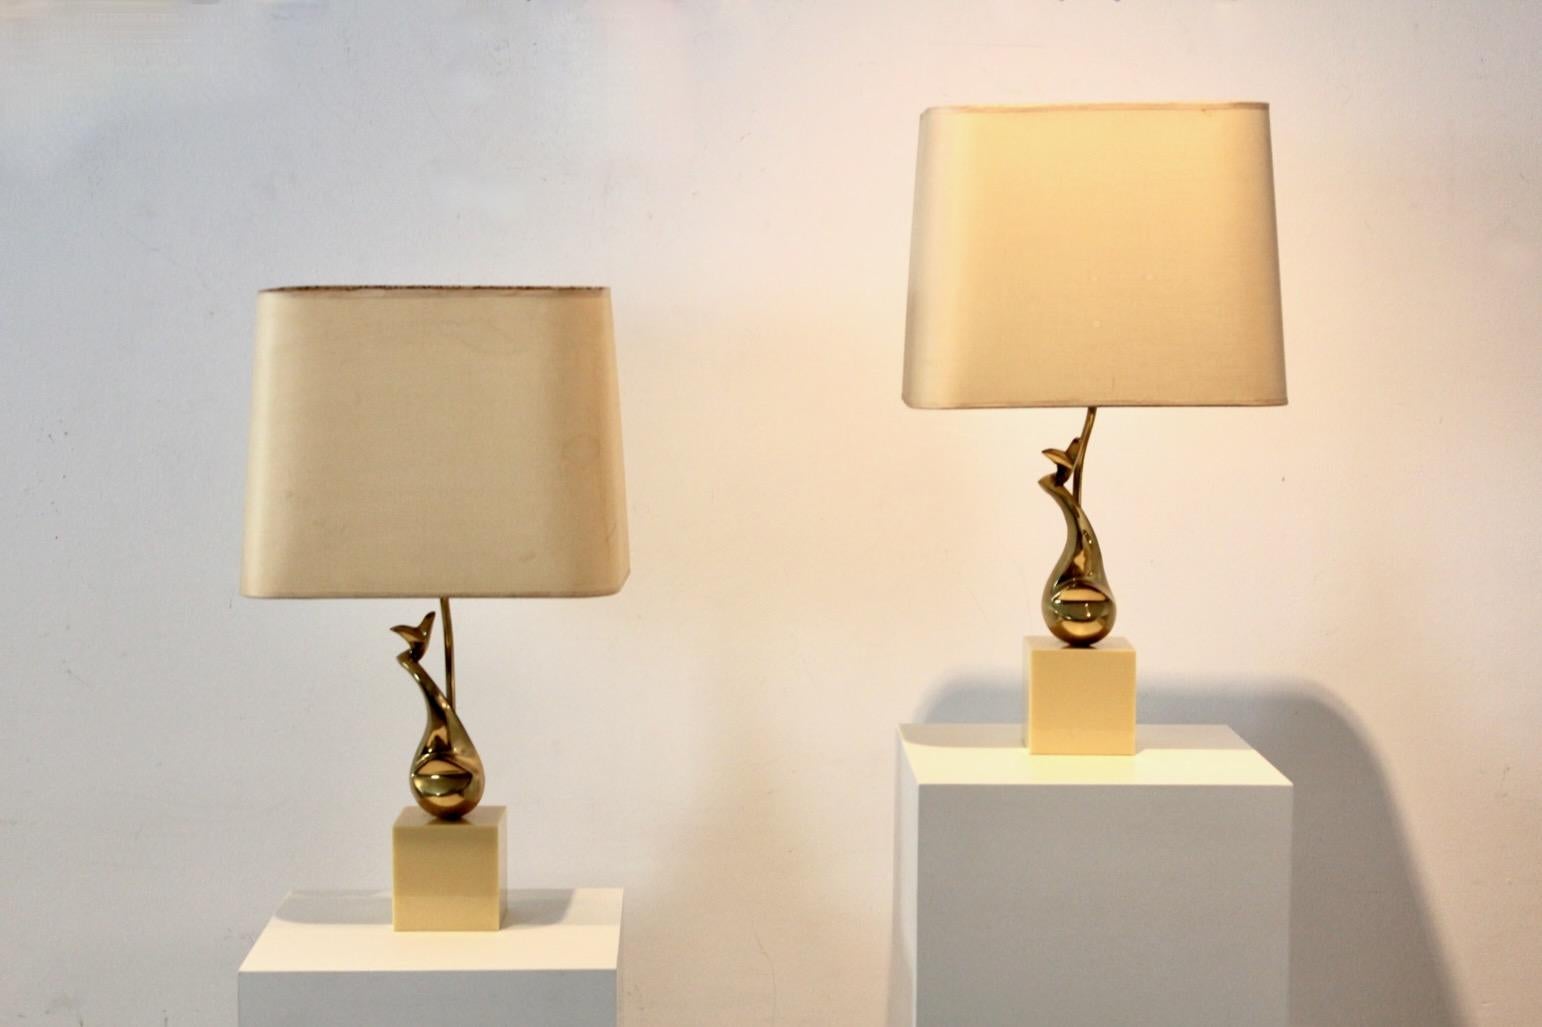 Pair of Exclusive Philippe-Jean Brass Art Sculpture Table Lamps, Signed For Sale 1